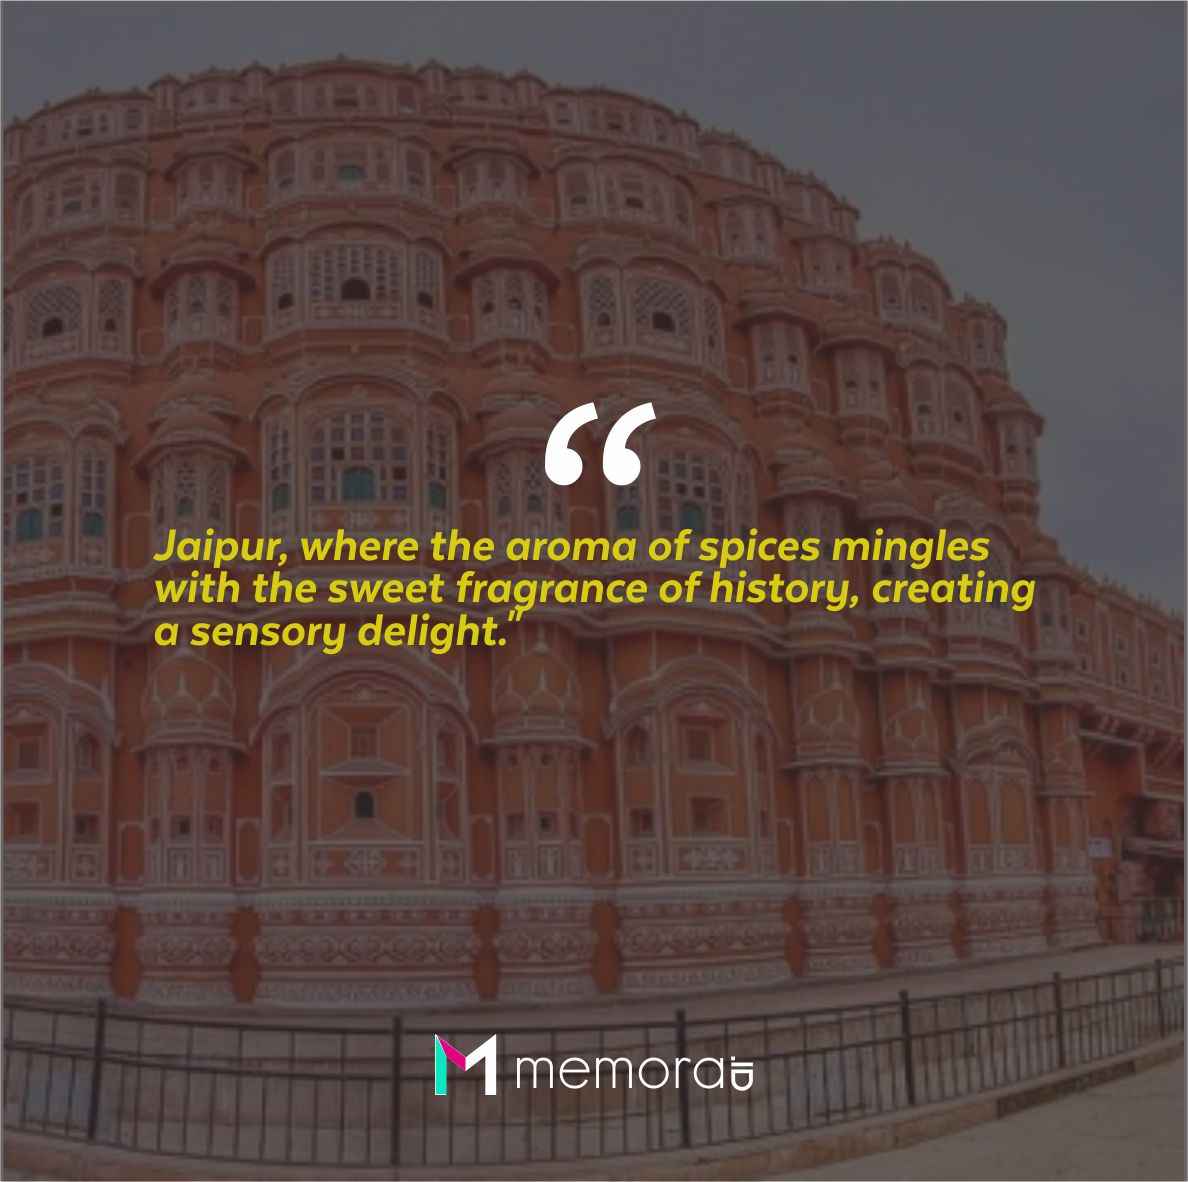 20 Quotes about Holidays in Jaipur India, The Pink City of India